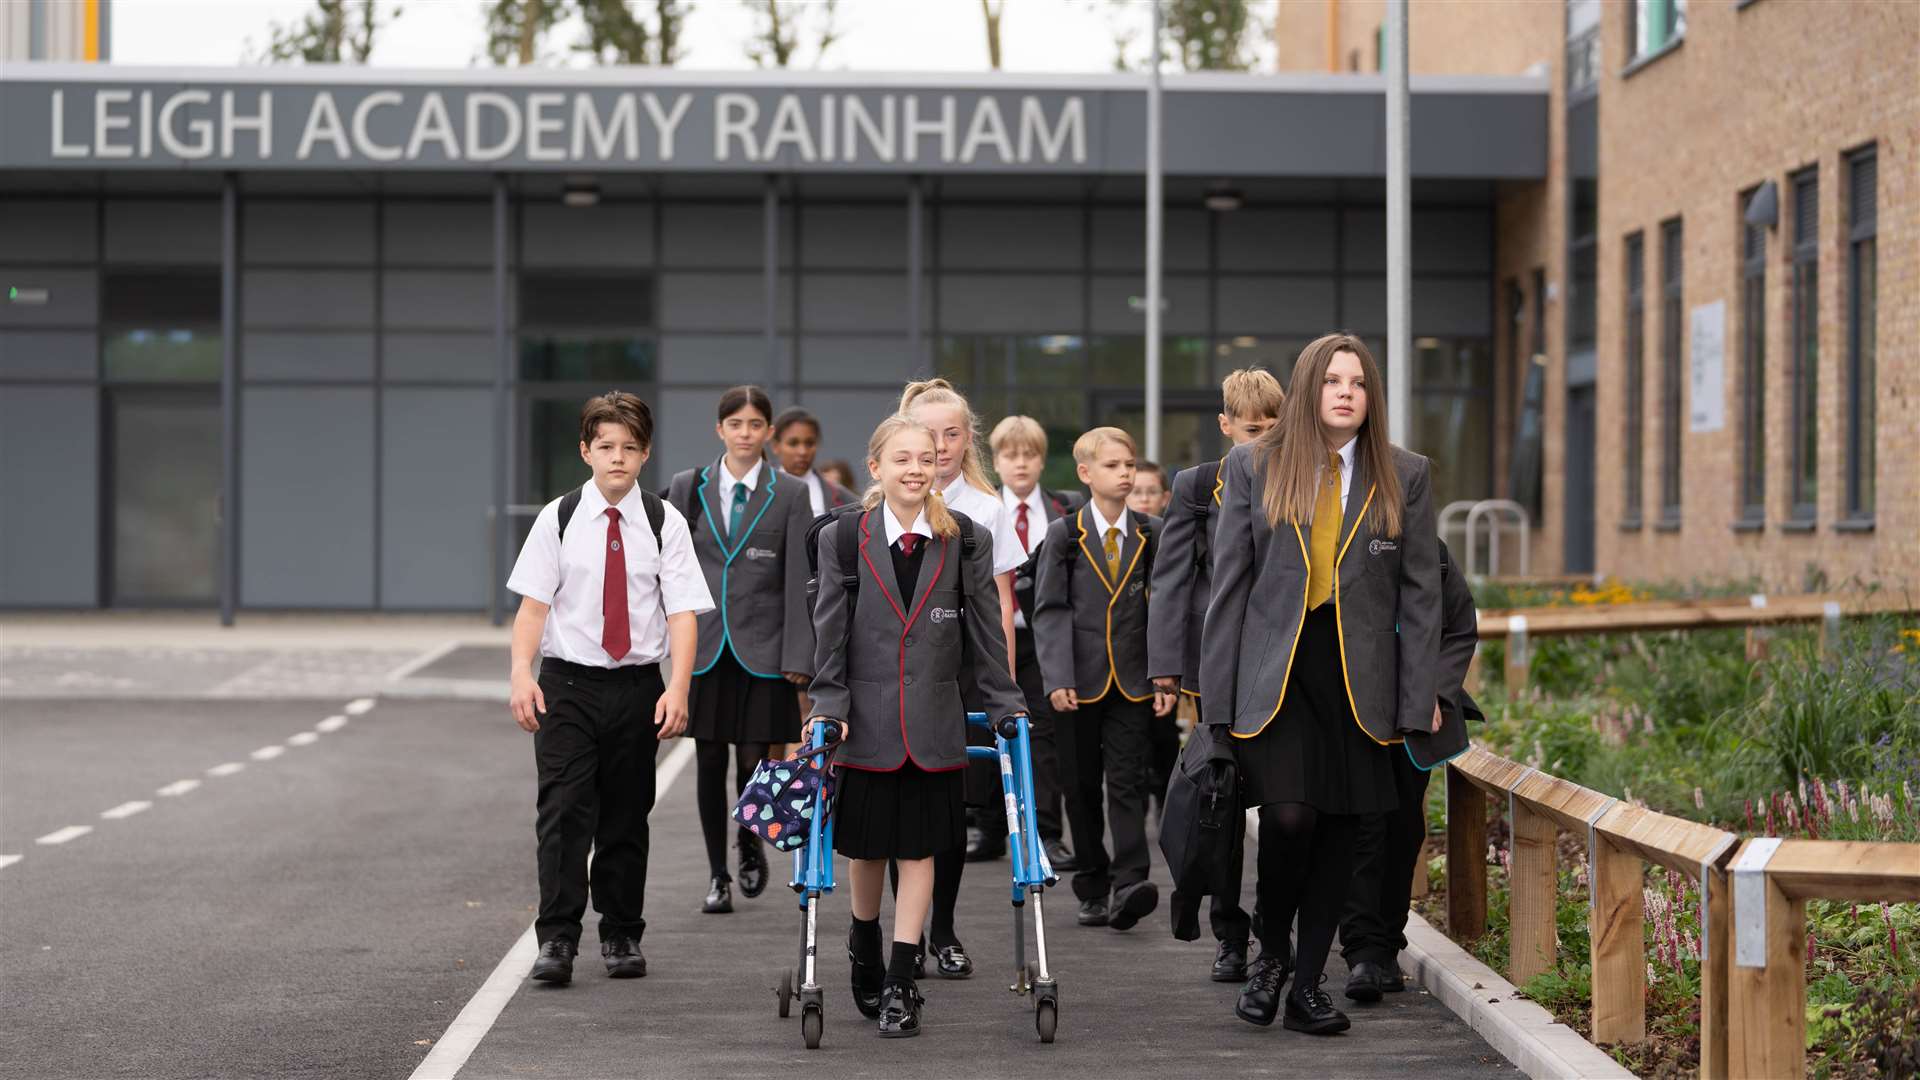 New pupils arrive at school for their first day as the Leigh Academy in Rainham opens its doors. Picture: Brandon Baily/Leigh Academy Trust